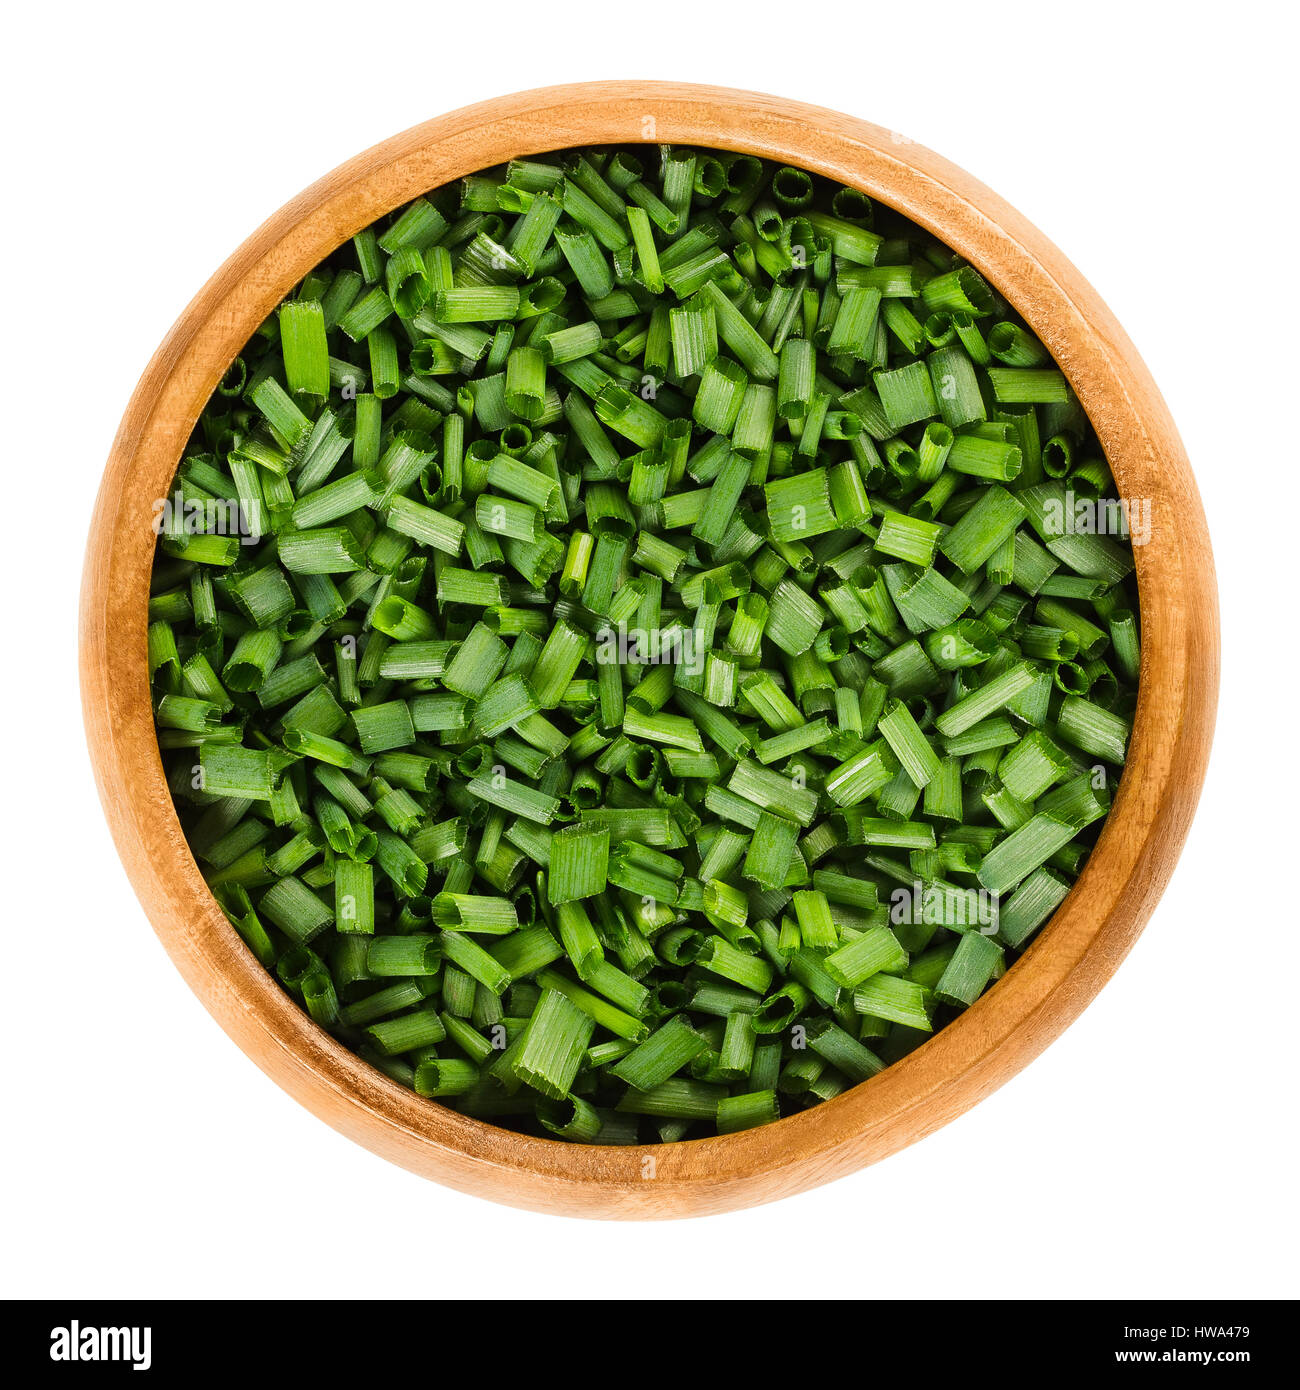 Chopped chives in wooden bowl. Fresh green edible herb of Allium schoenoprasum, used as an ingredient for fish, potatoes and soups. Stock Photo